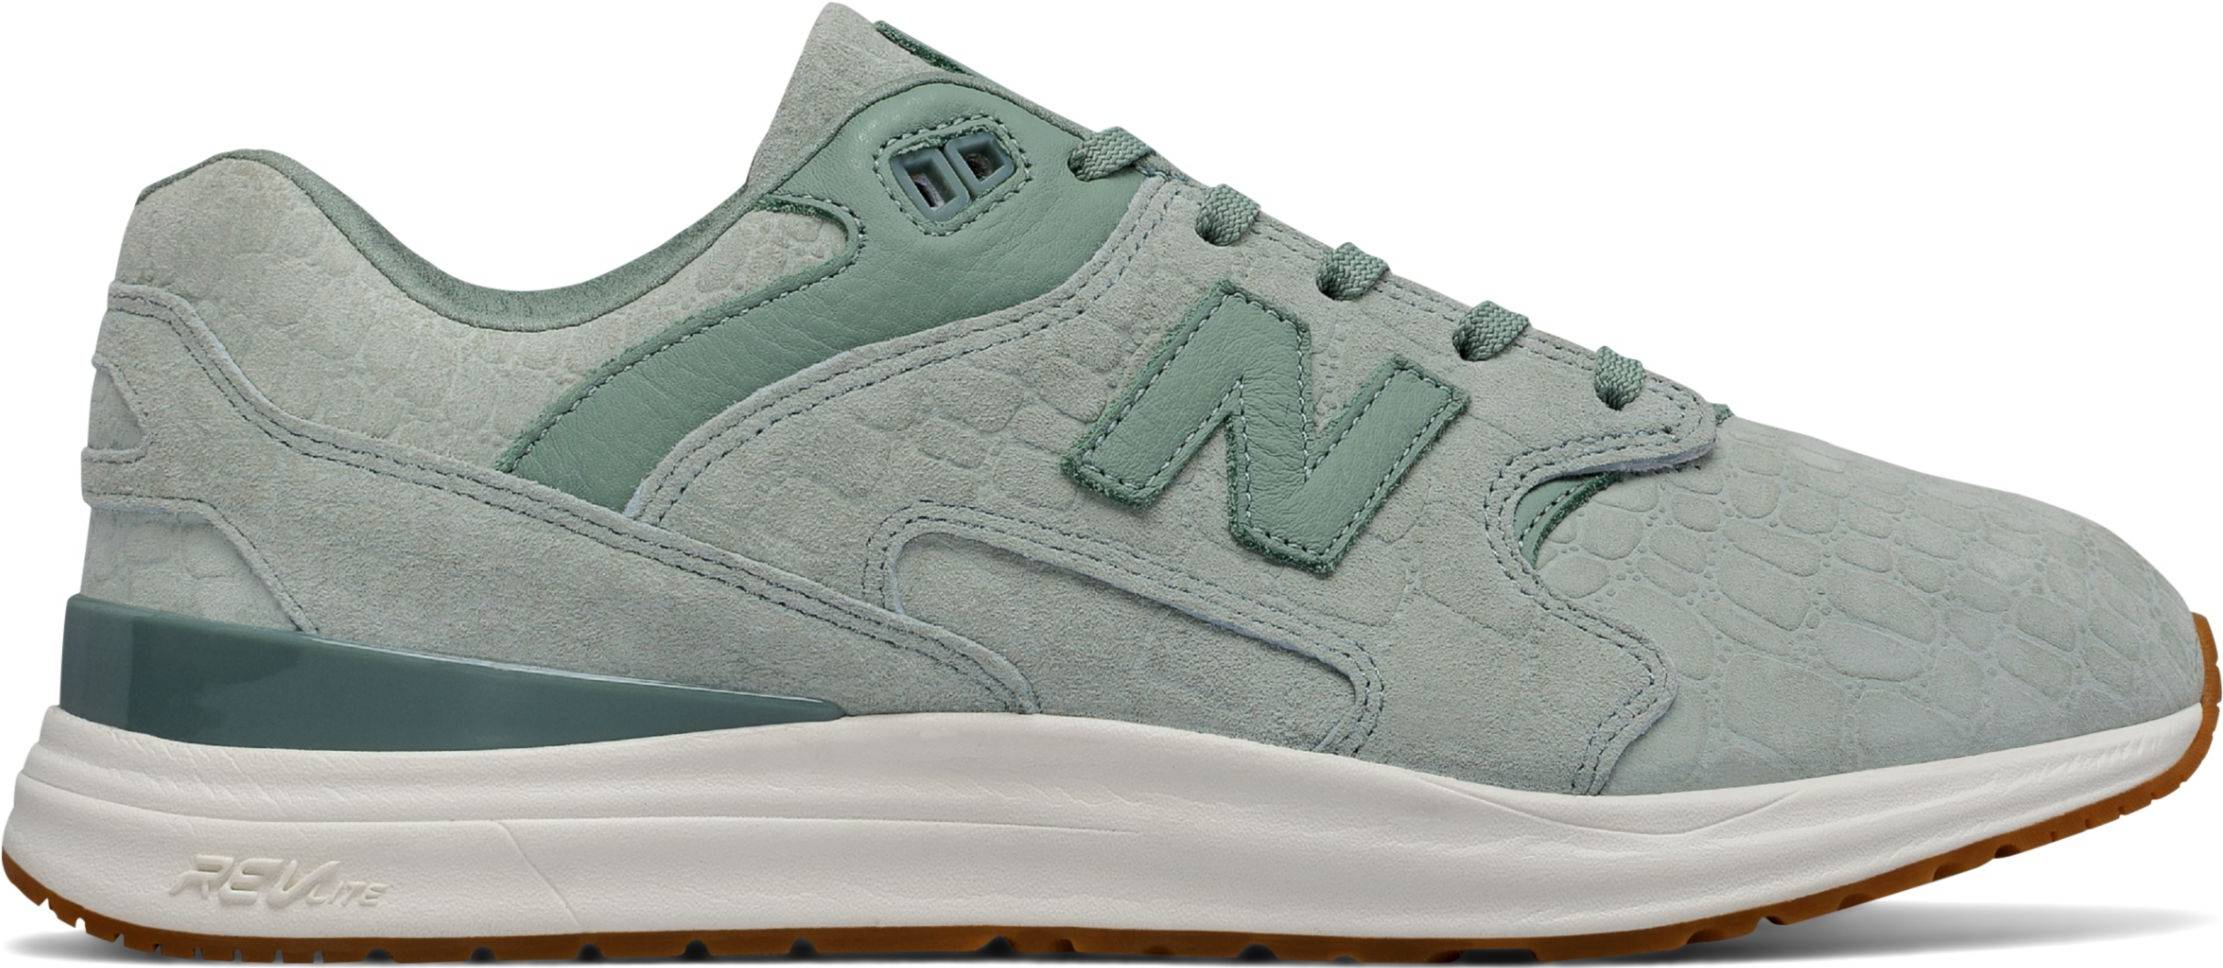 Only $54 + Review of New Balance 1550 